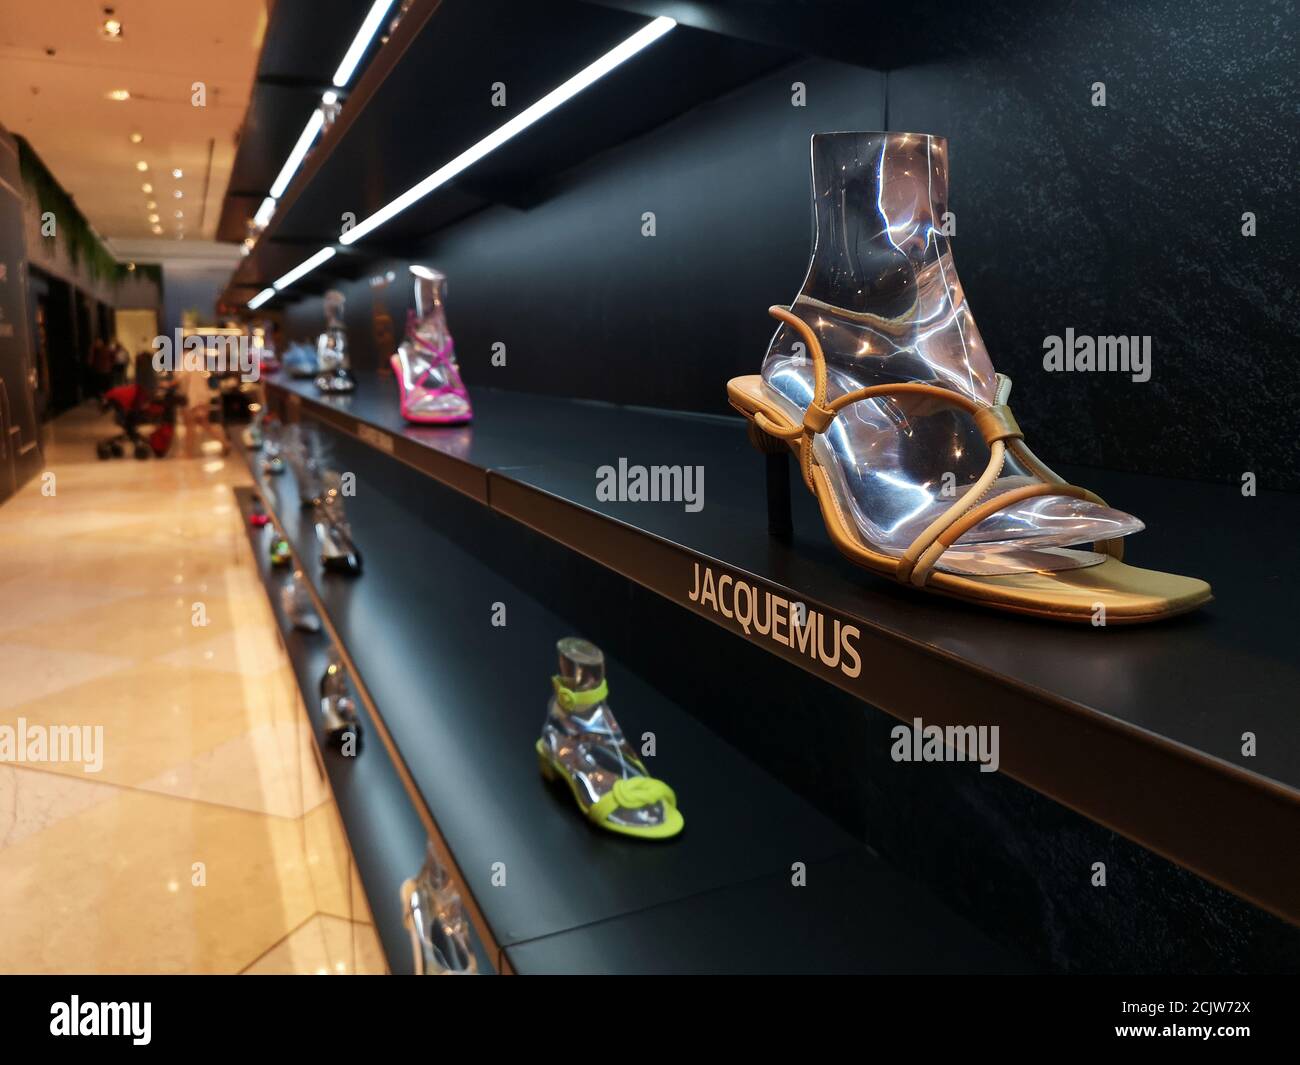 Pegs Staircase Unite French fashion designer Jacquemus' shoes are seen on display at the Dubai  Mall in Dubai, United Arab Emirates, April 18, 2019. Picture taken April  18, 2019. REUTERS/ Hamad I Mohammed Stock Photo - Alamy